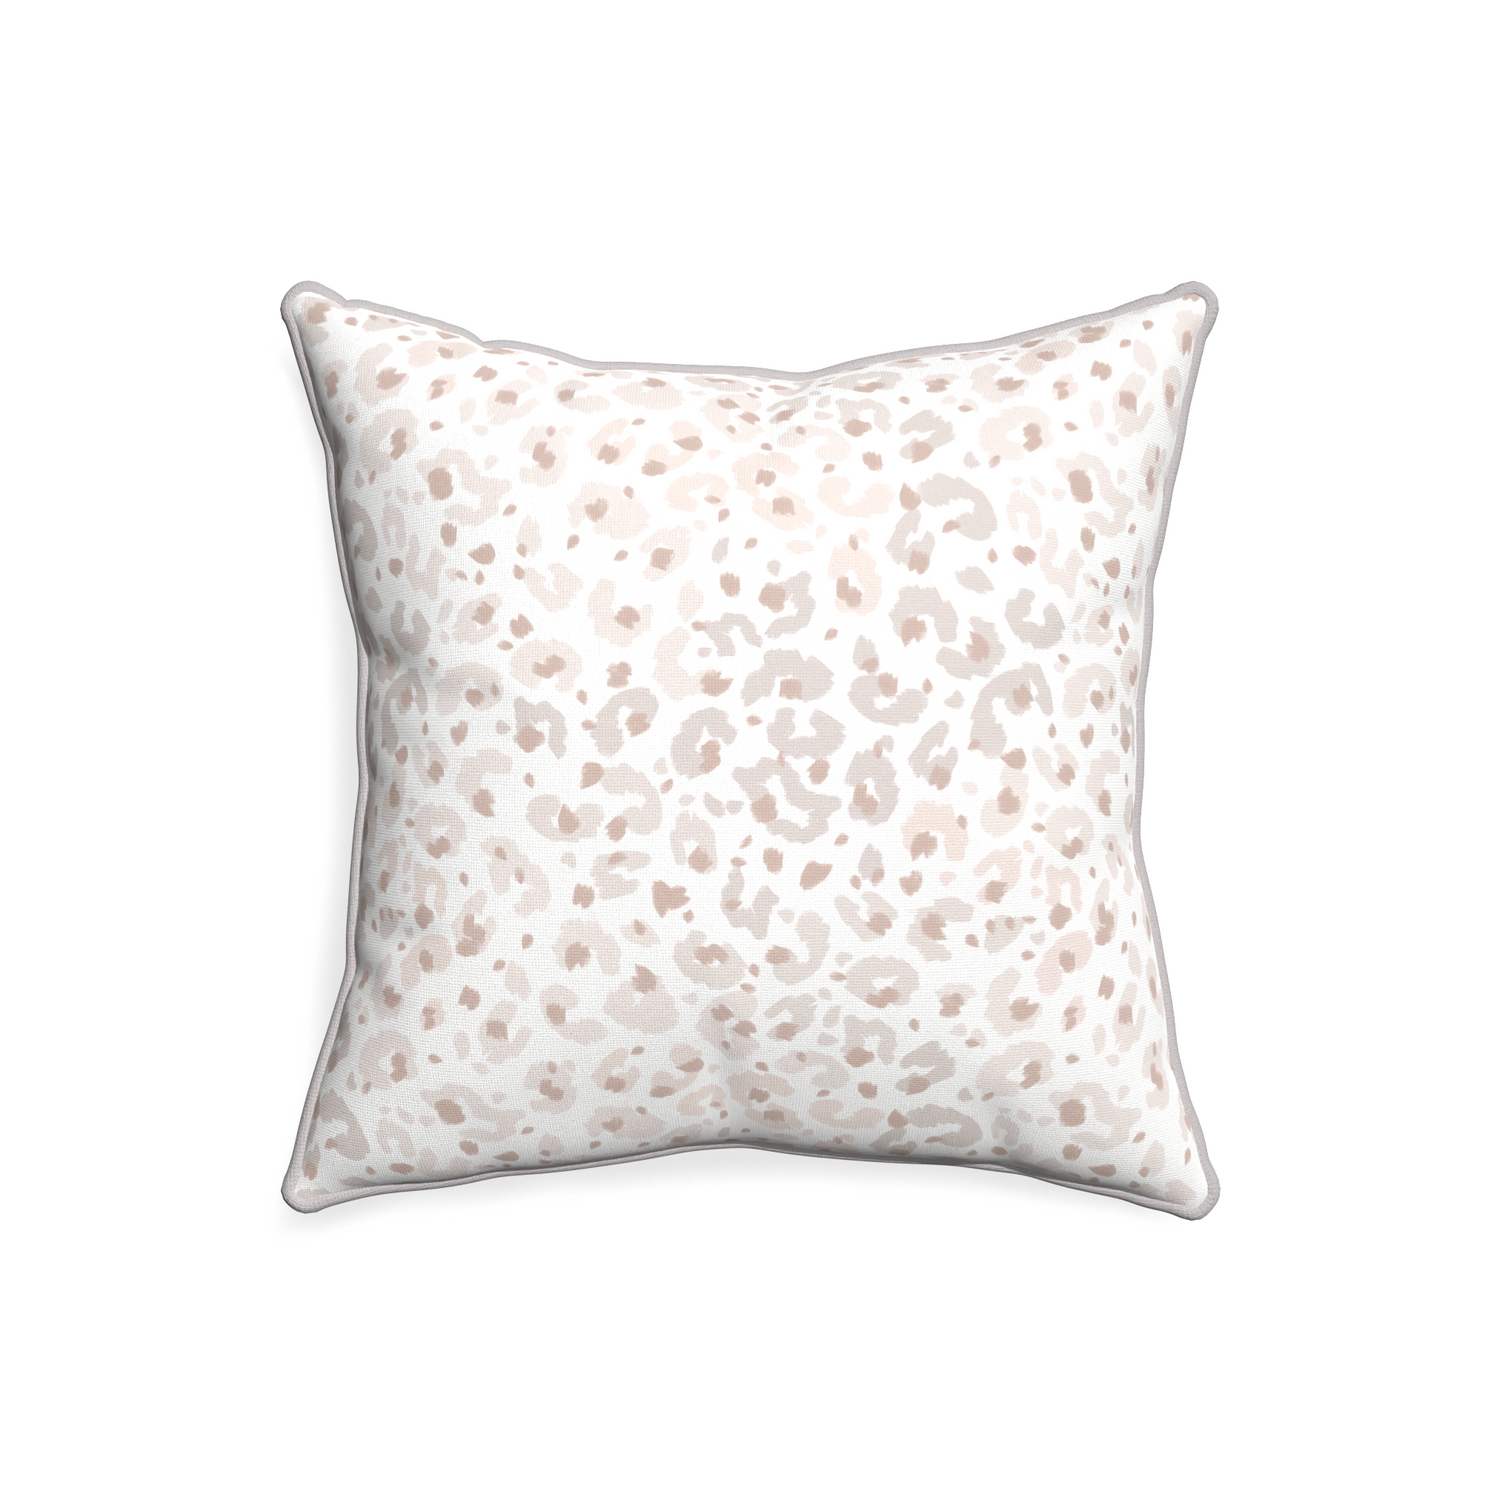 20-square rosie custom beige animal printpillow with pebble piping on white background